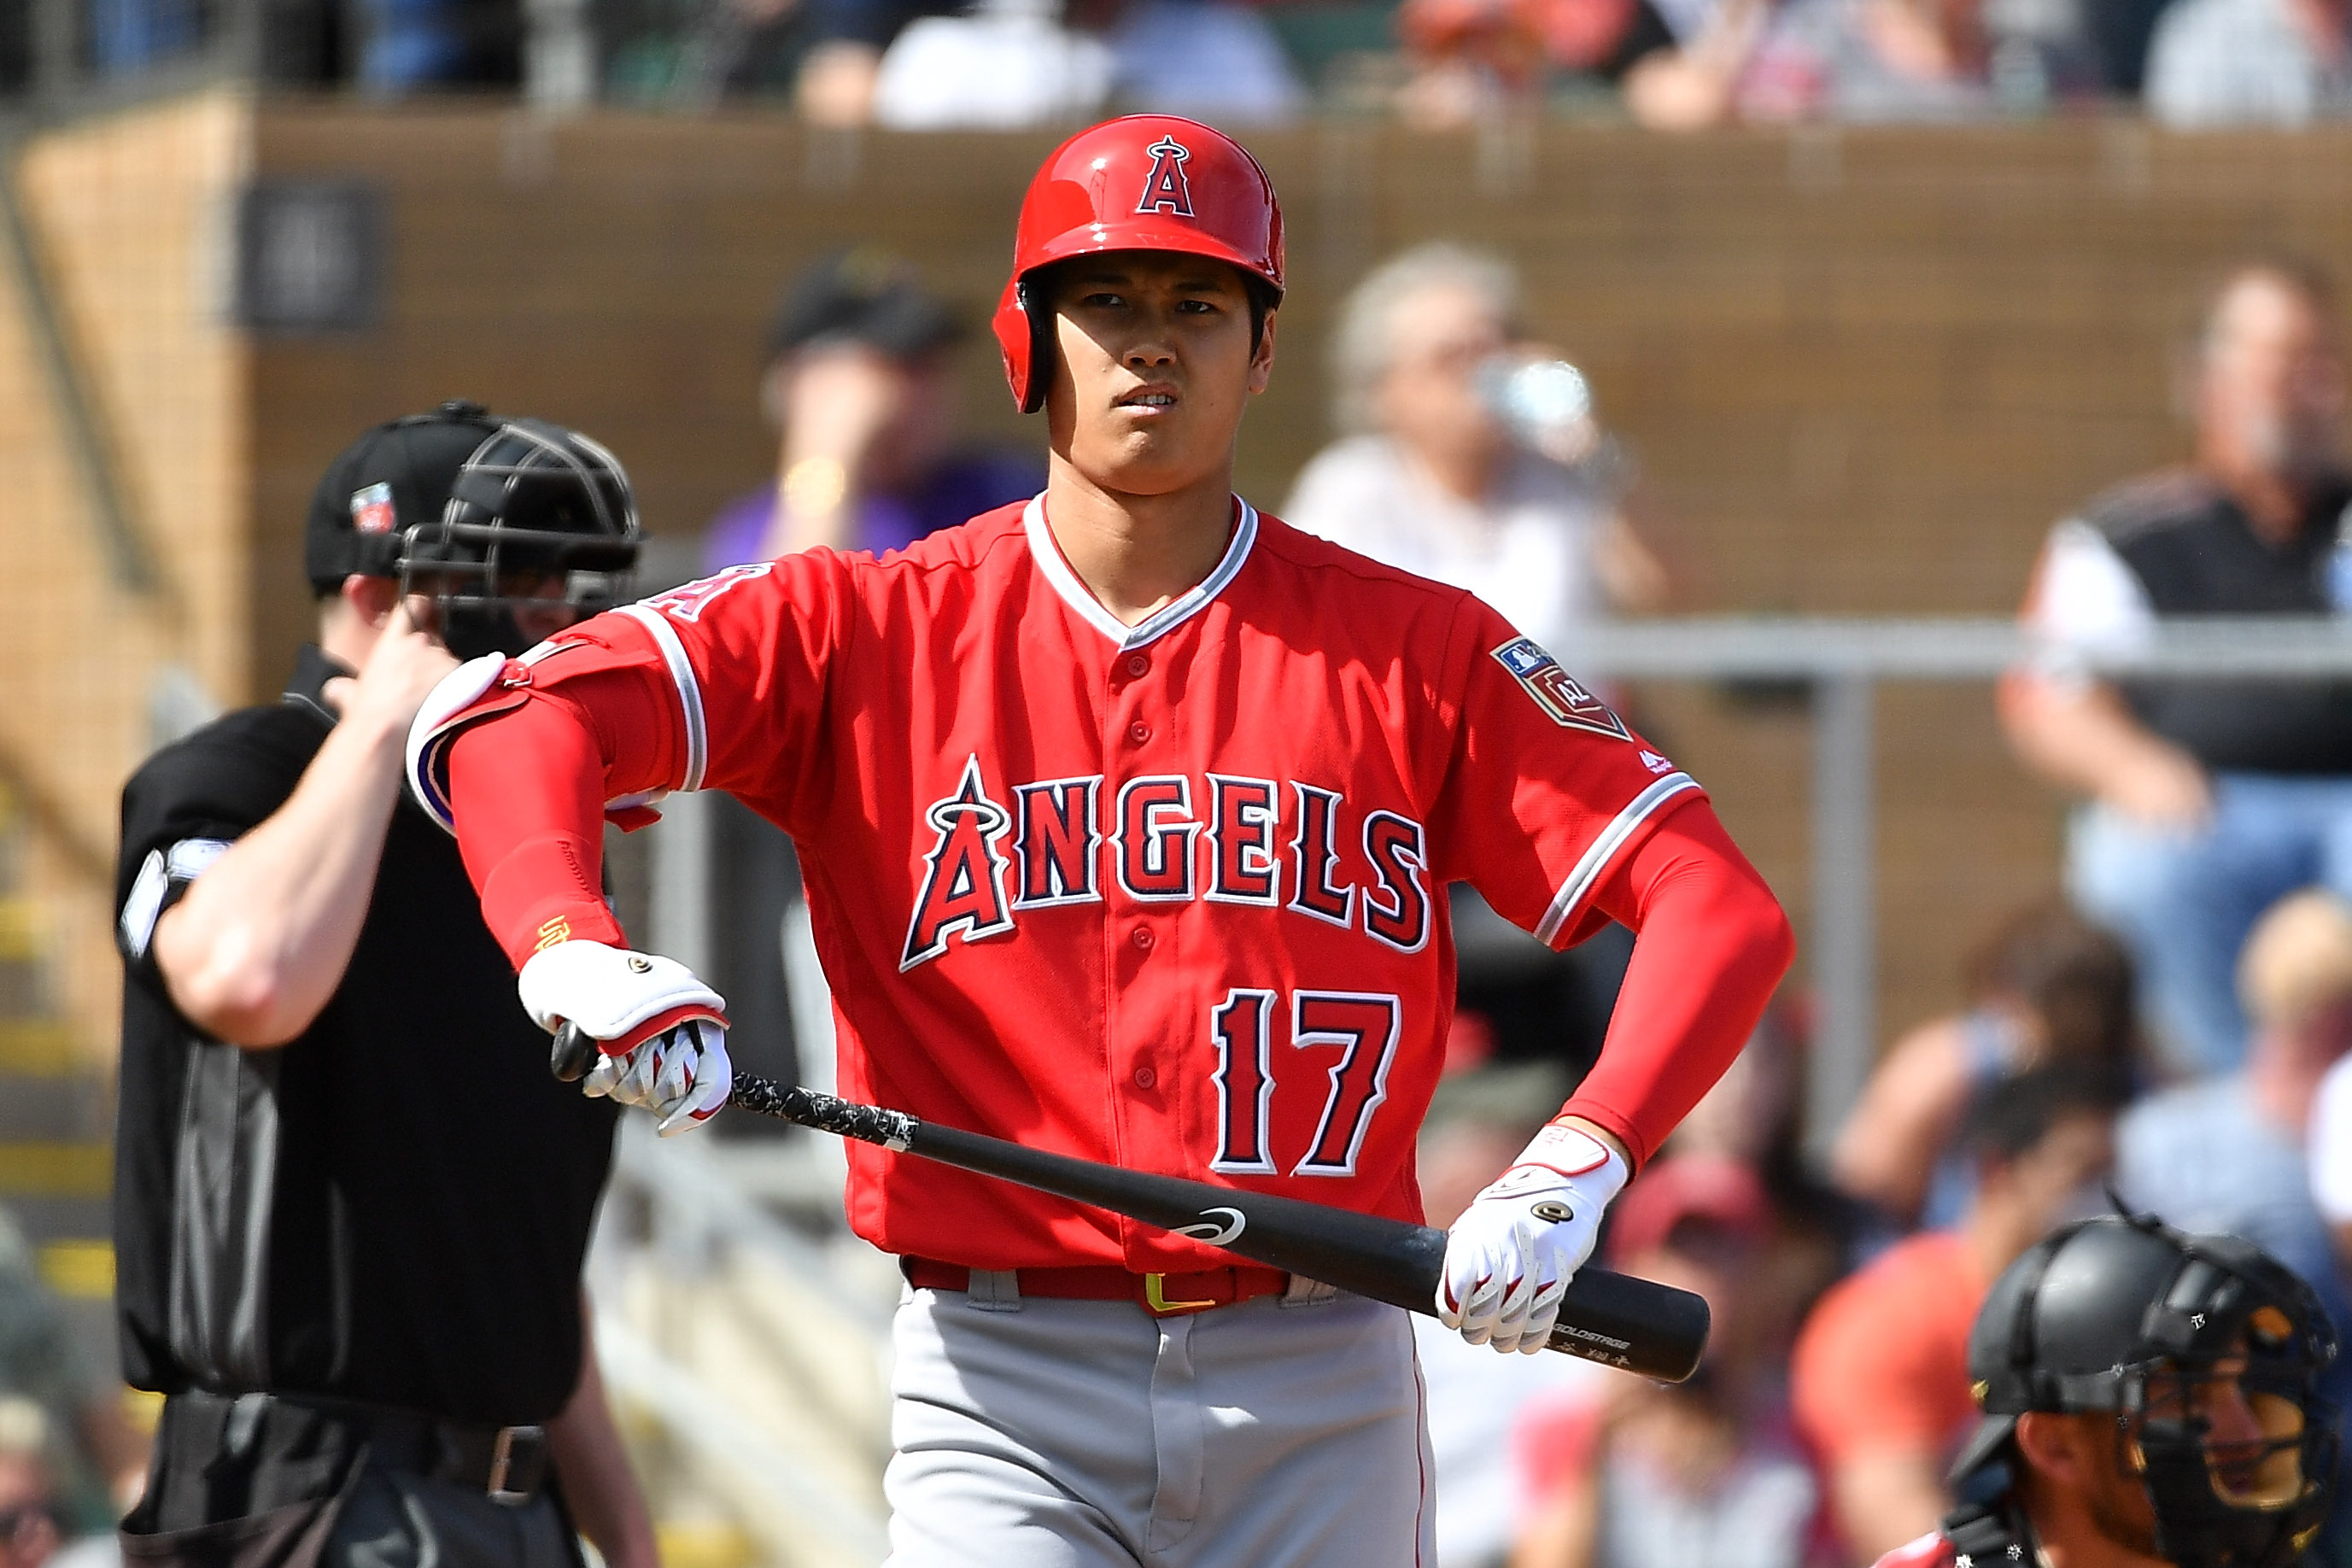 New York Yankees: Fans should be happy without Shohei Ohtani